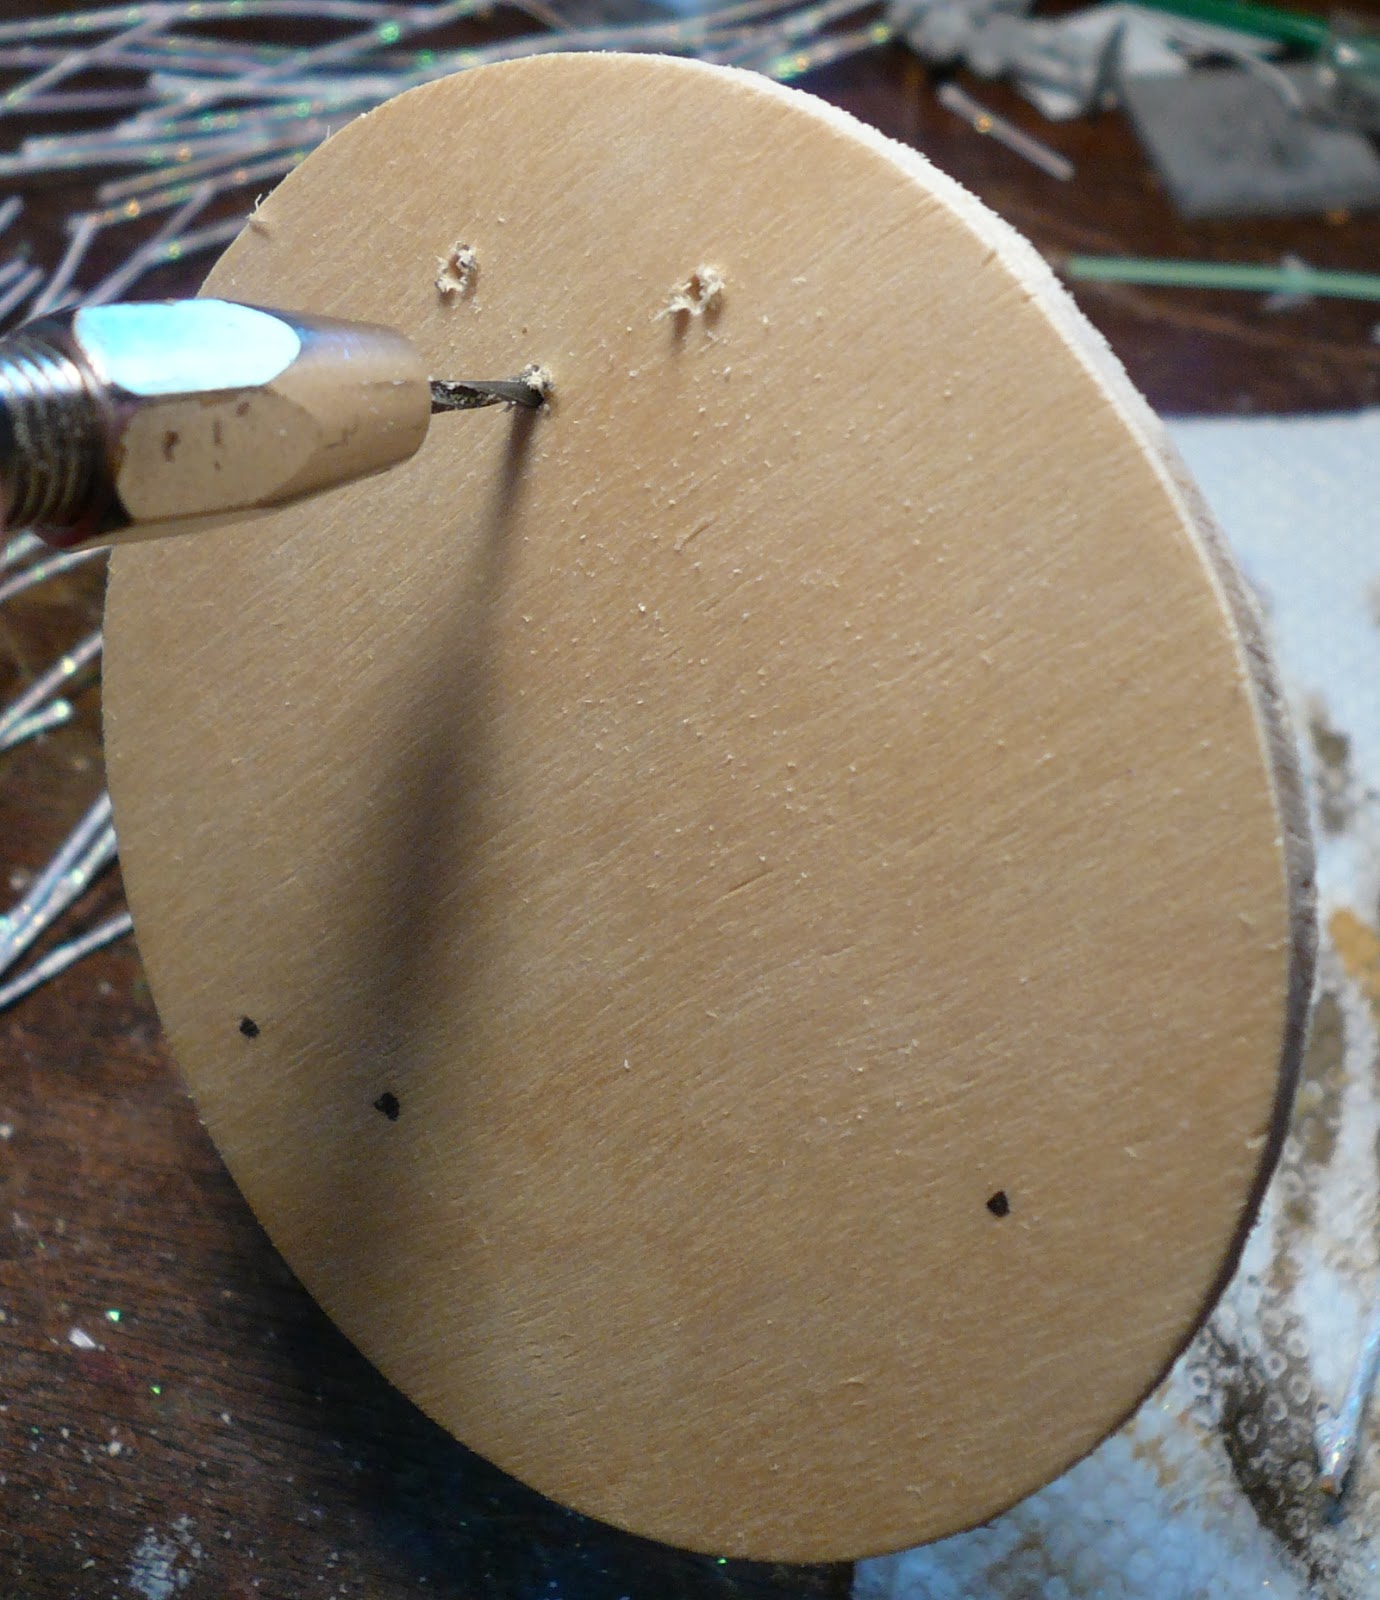 Hand drilling holes for tree trunks